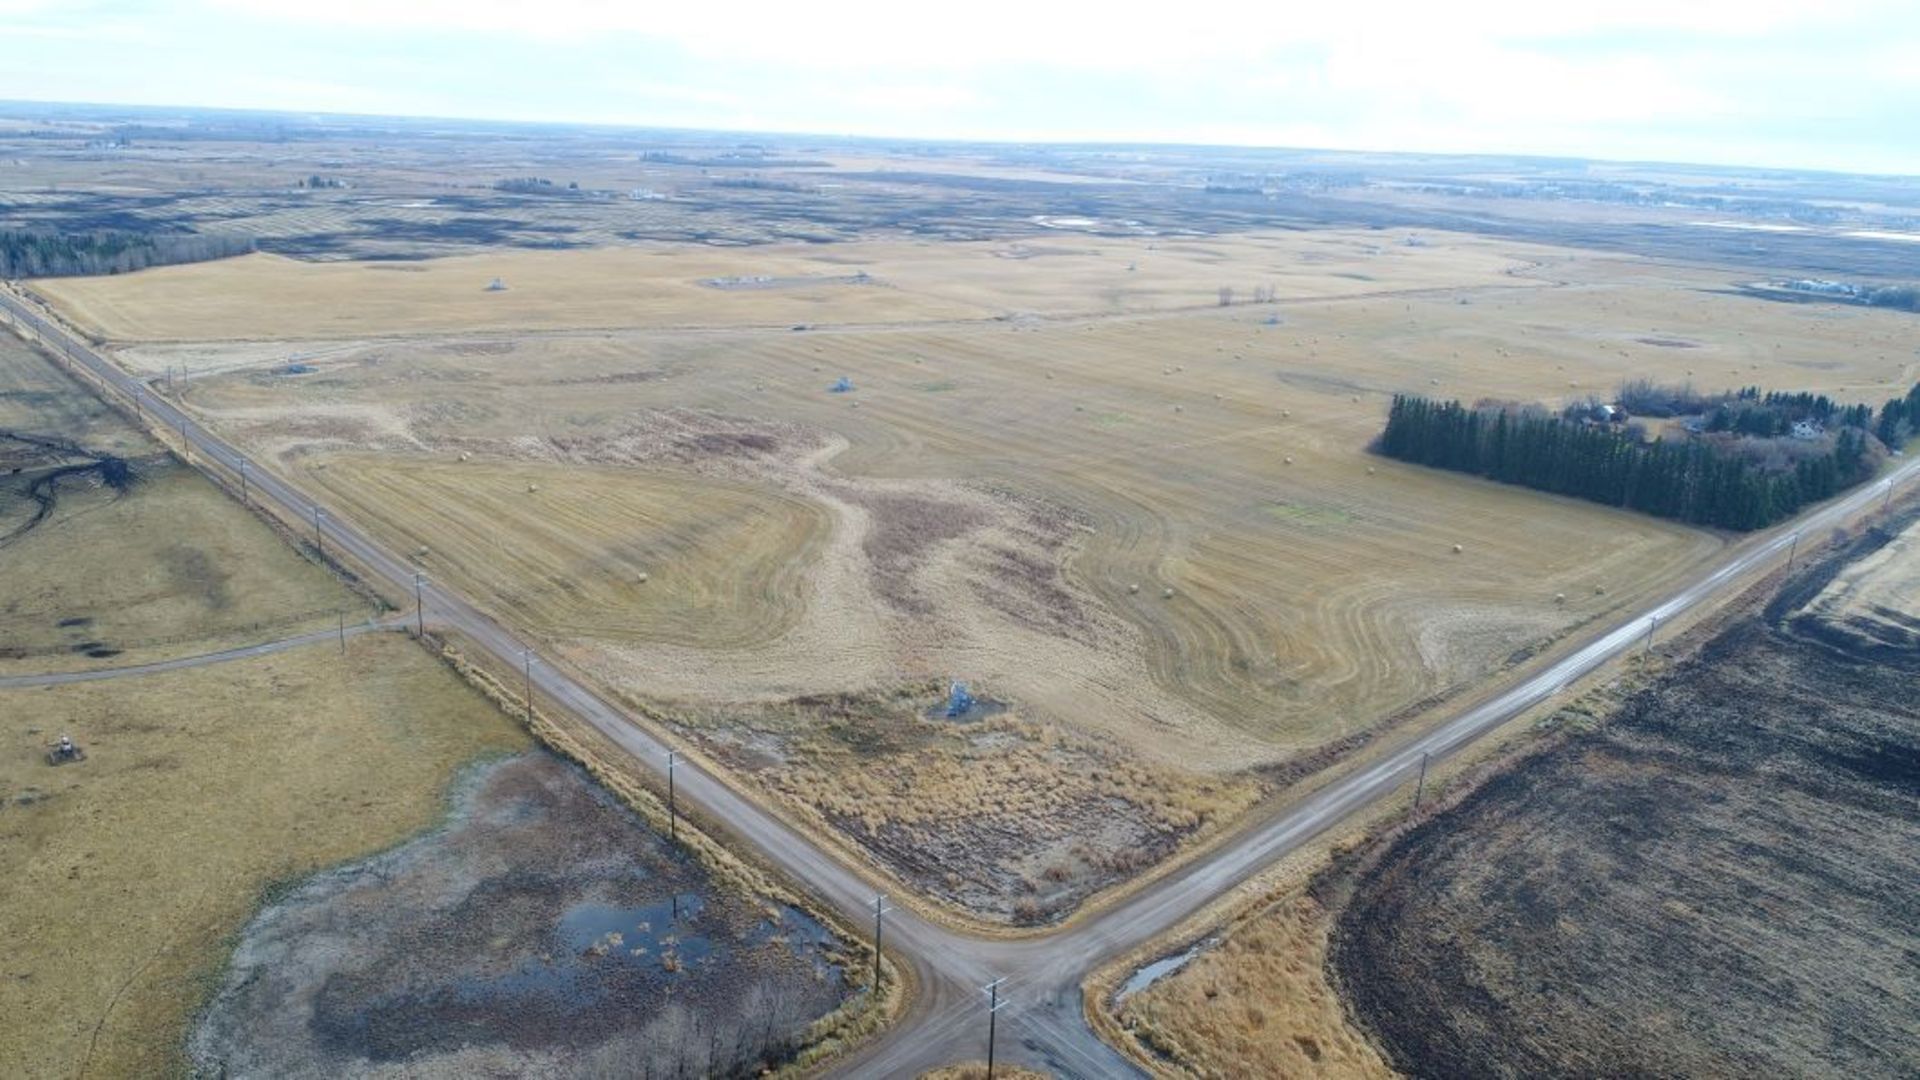 160+/- Total Acres NW 8-56-20-W4, Bruderheim, AB, consisting of Crop Land, Surface Lease & Yard Site - Image 2 of 34